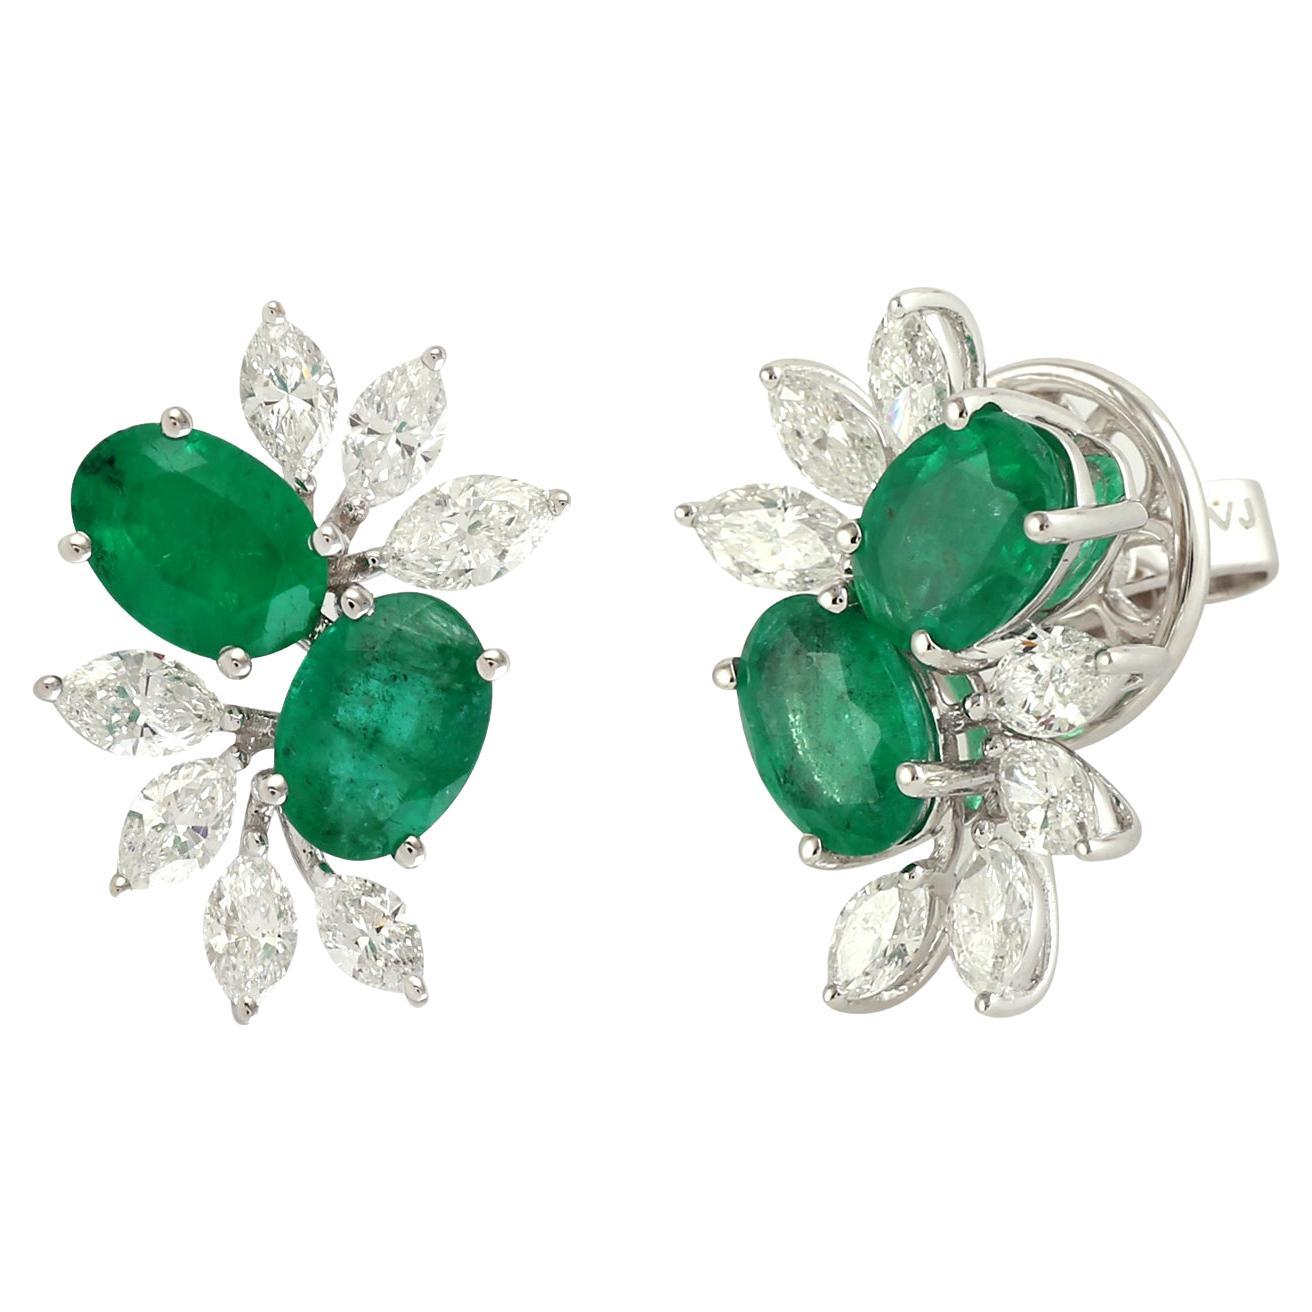 Oval Shaped Emerald & Pear Shaped Diamonds Studs Made In 18k White Gold For Sale